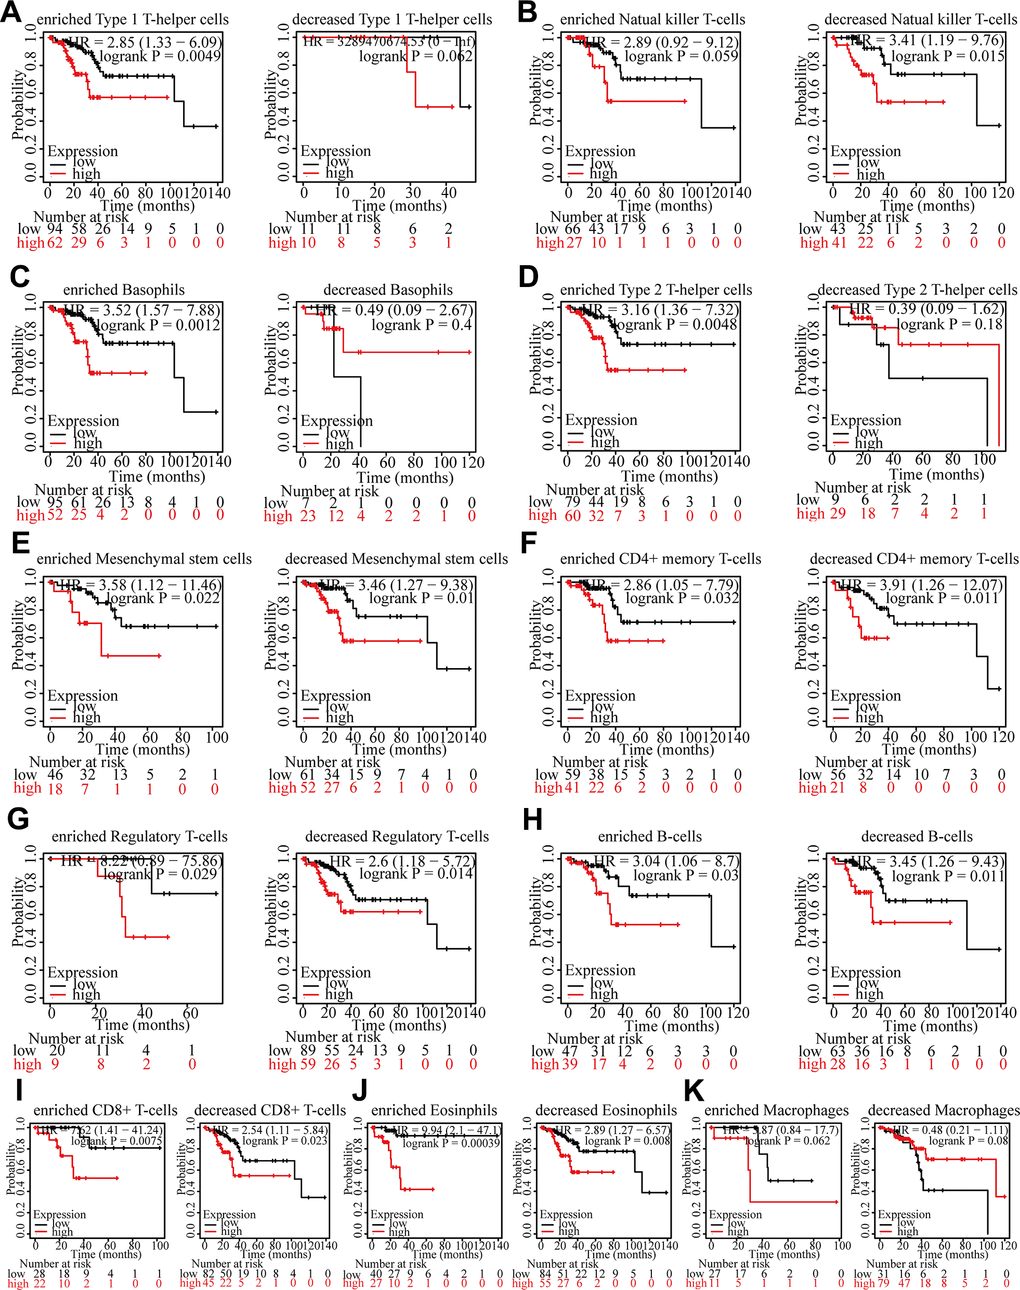 Survival curves of high and low expression of LAMP3 in UCEC in diverse immune cell subgroups. (A) Type1 T-helper cells (B) Natural killer T-cells (C) Basophils (D) Type2 T-helper cells (E) Mesenchymal stem cells (F) CD4+ memory T-cells (G) Regulatory T-cells (H) B-cells (I) CD8+ T-cells (J) Eosinophils (K) Macrophages.